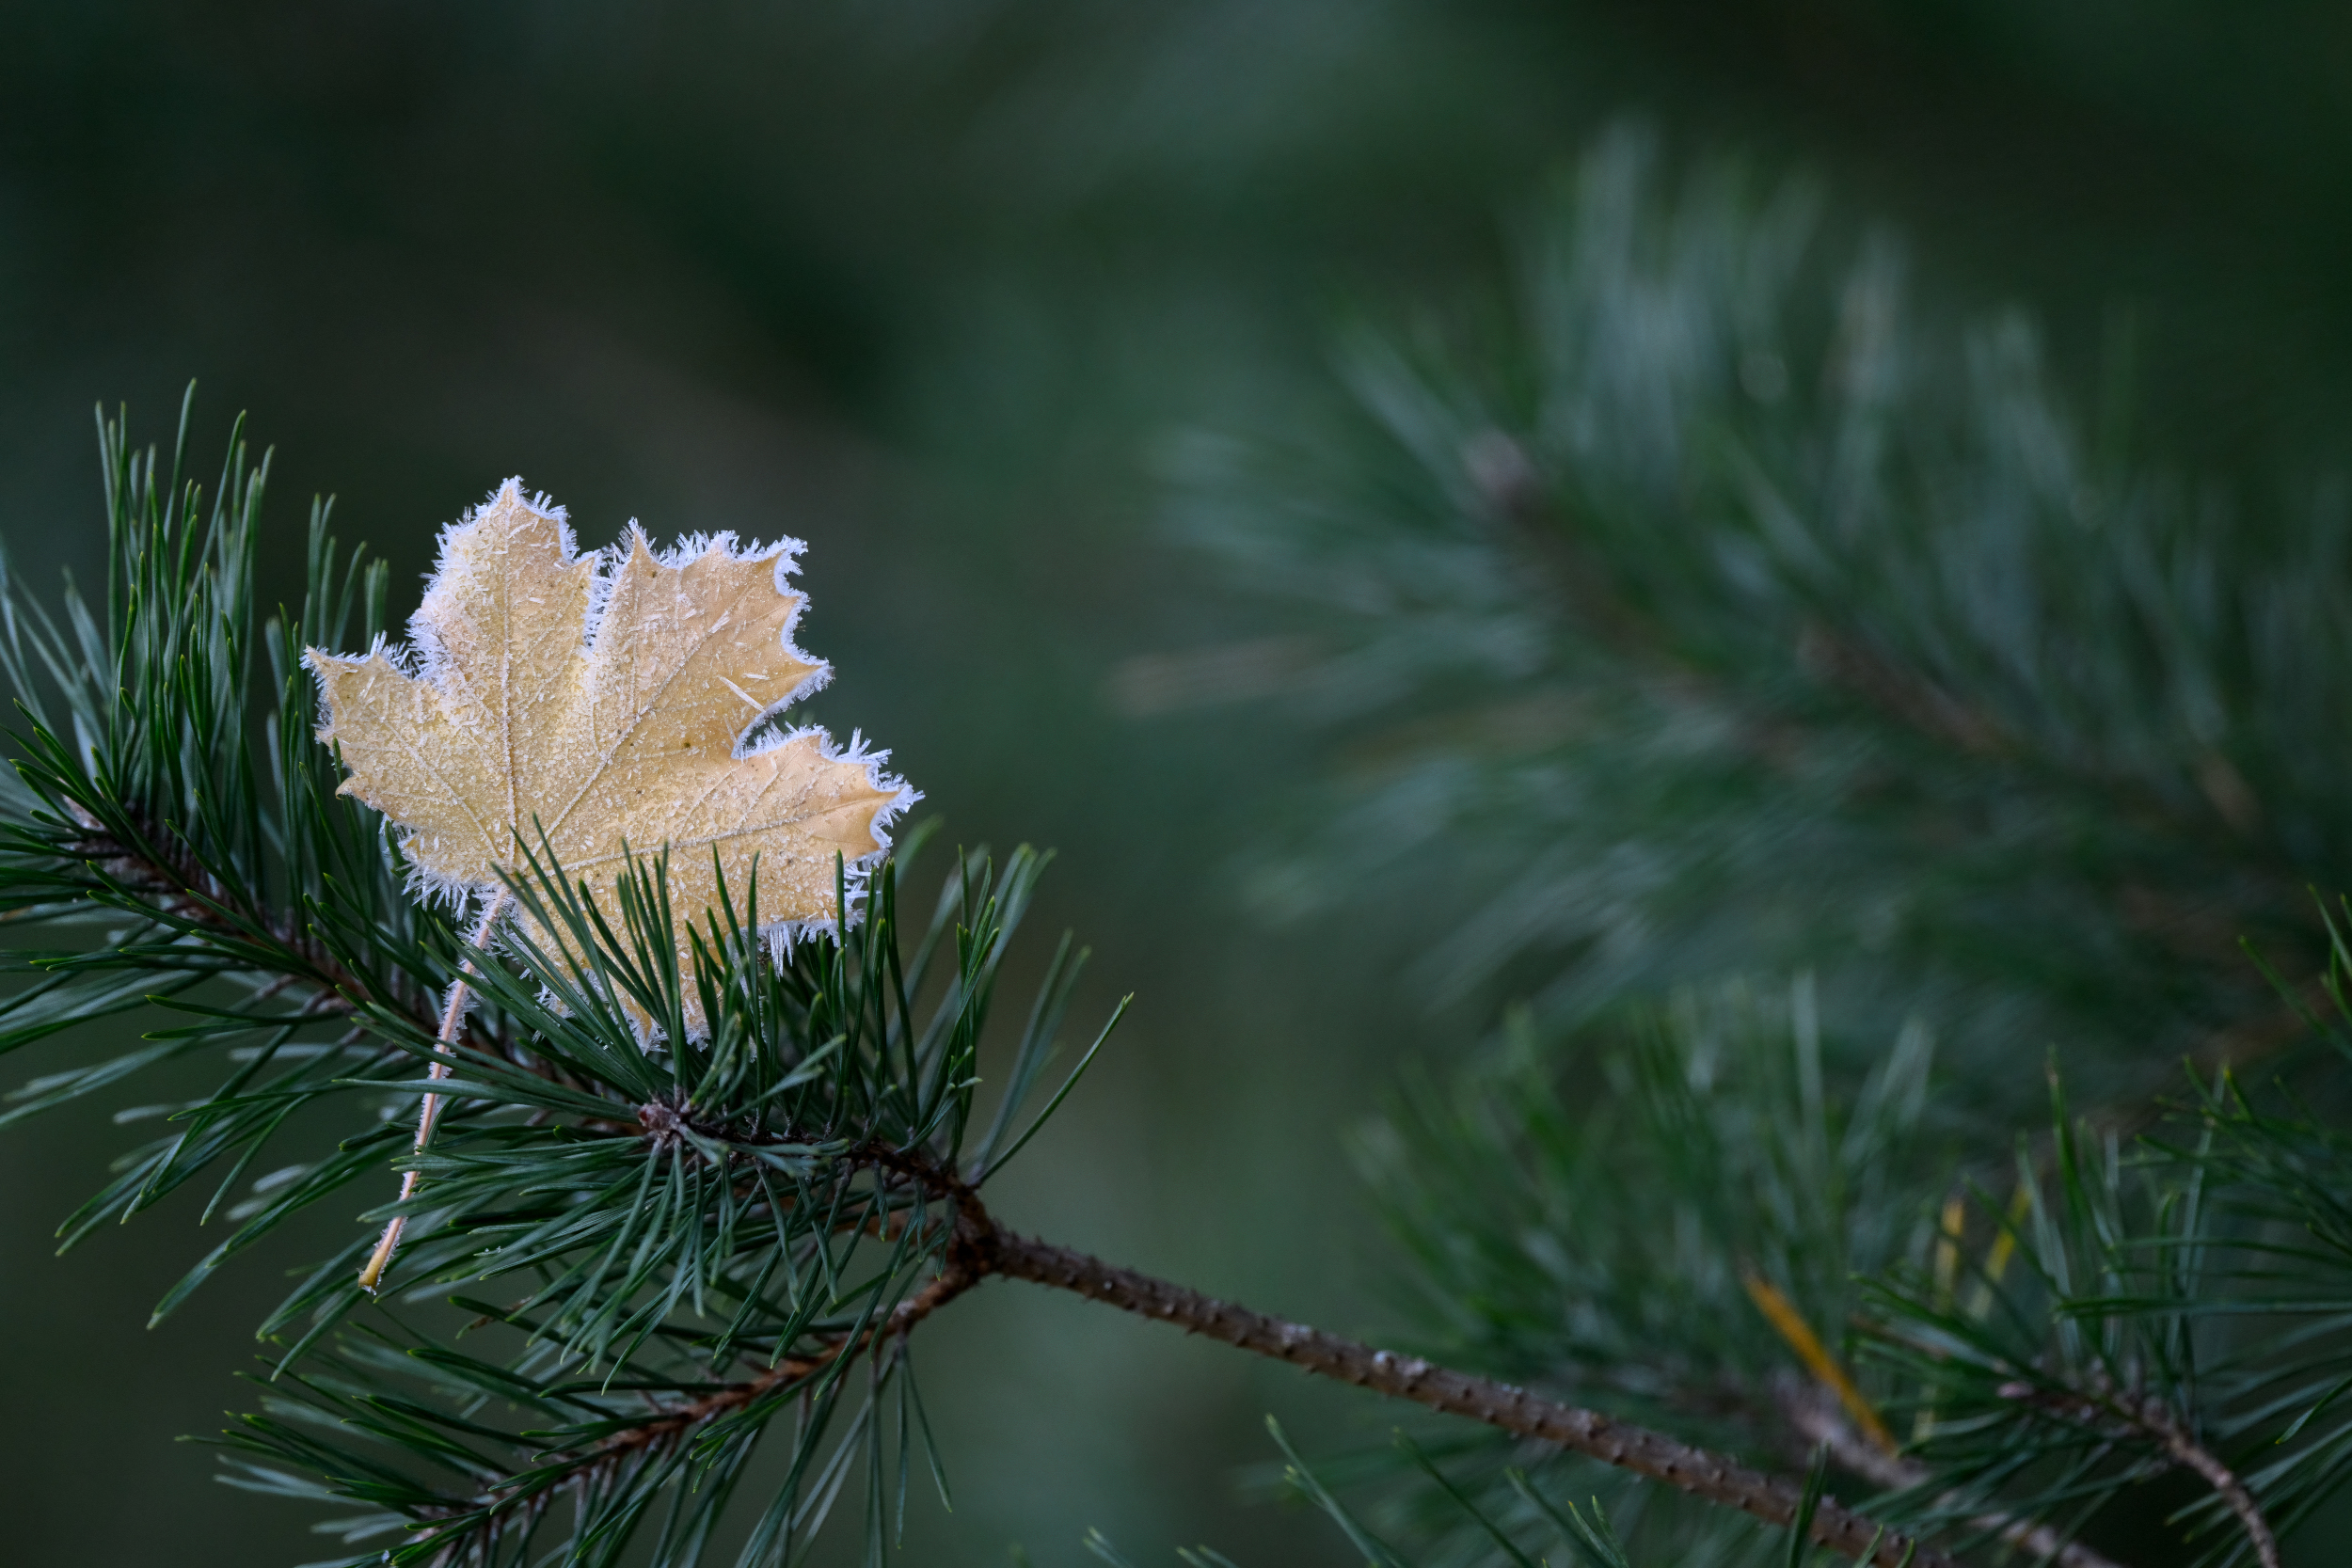 a leaf with hoarfrost around the edges sits wedged in some green pine needles.